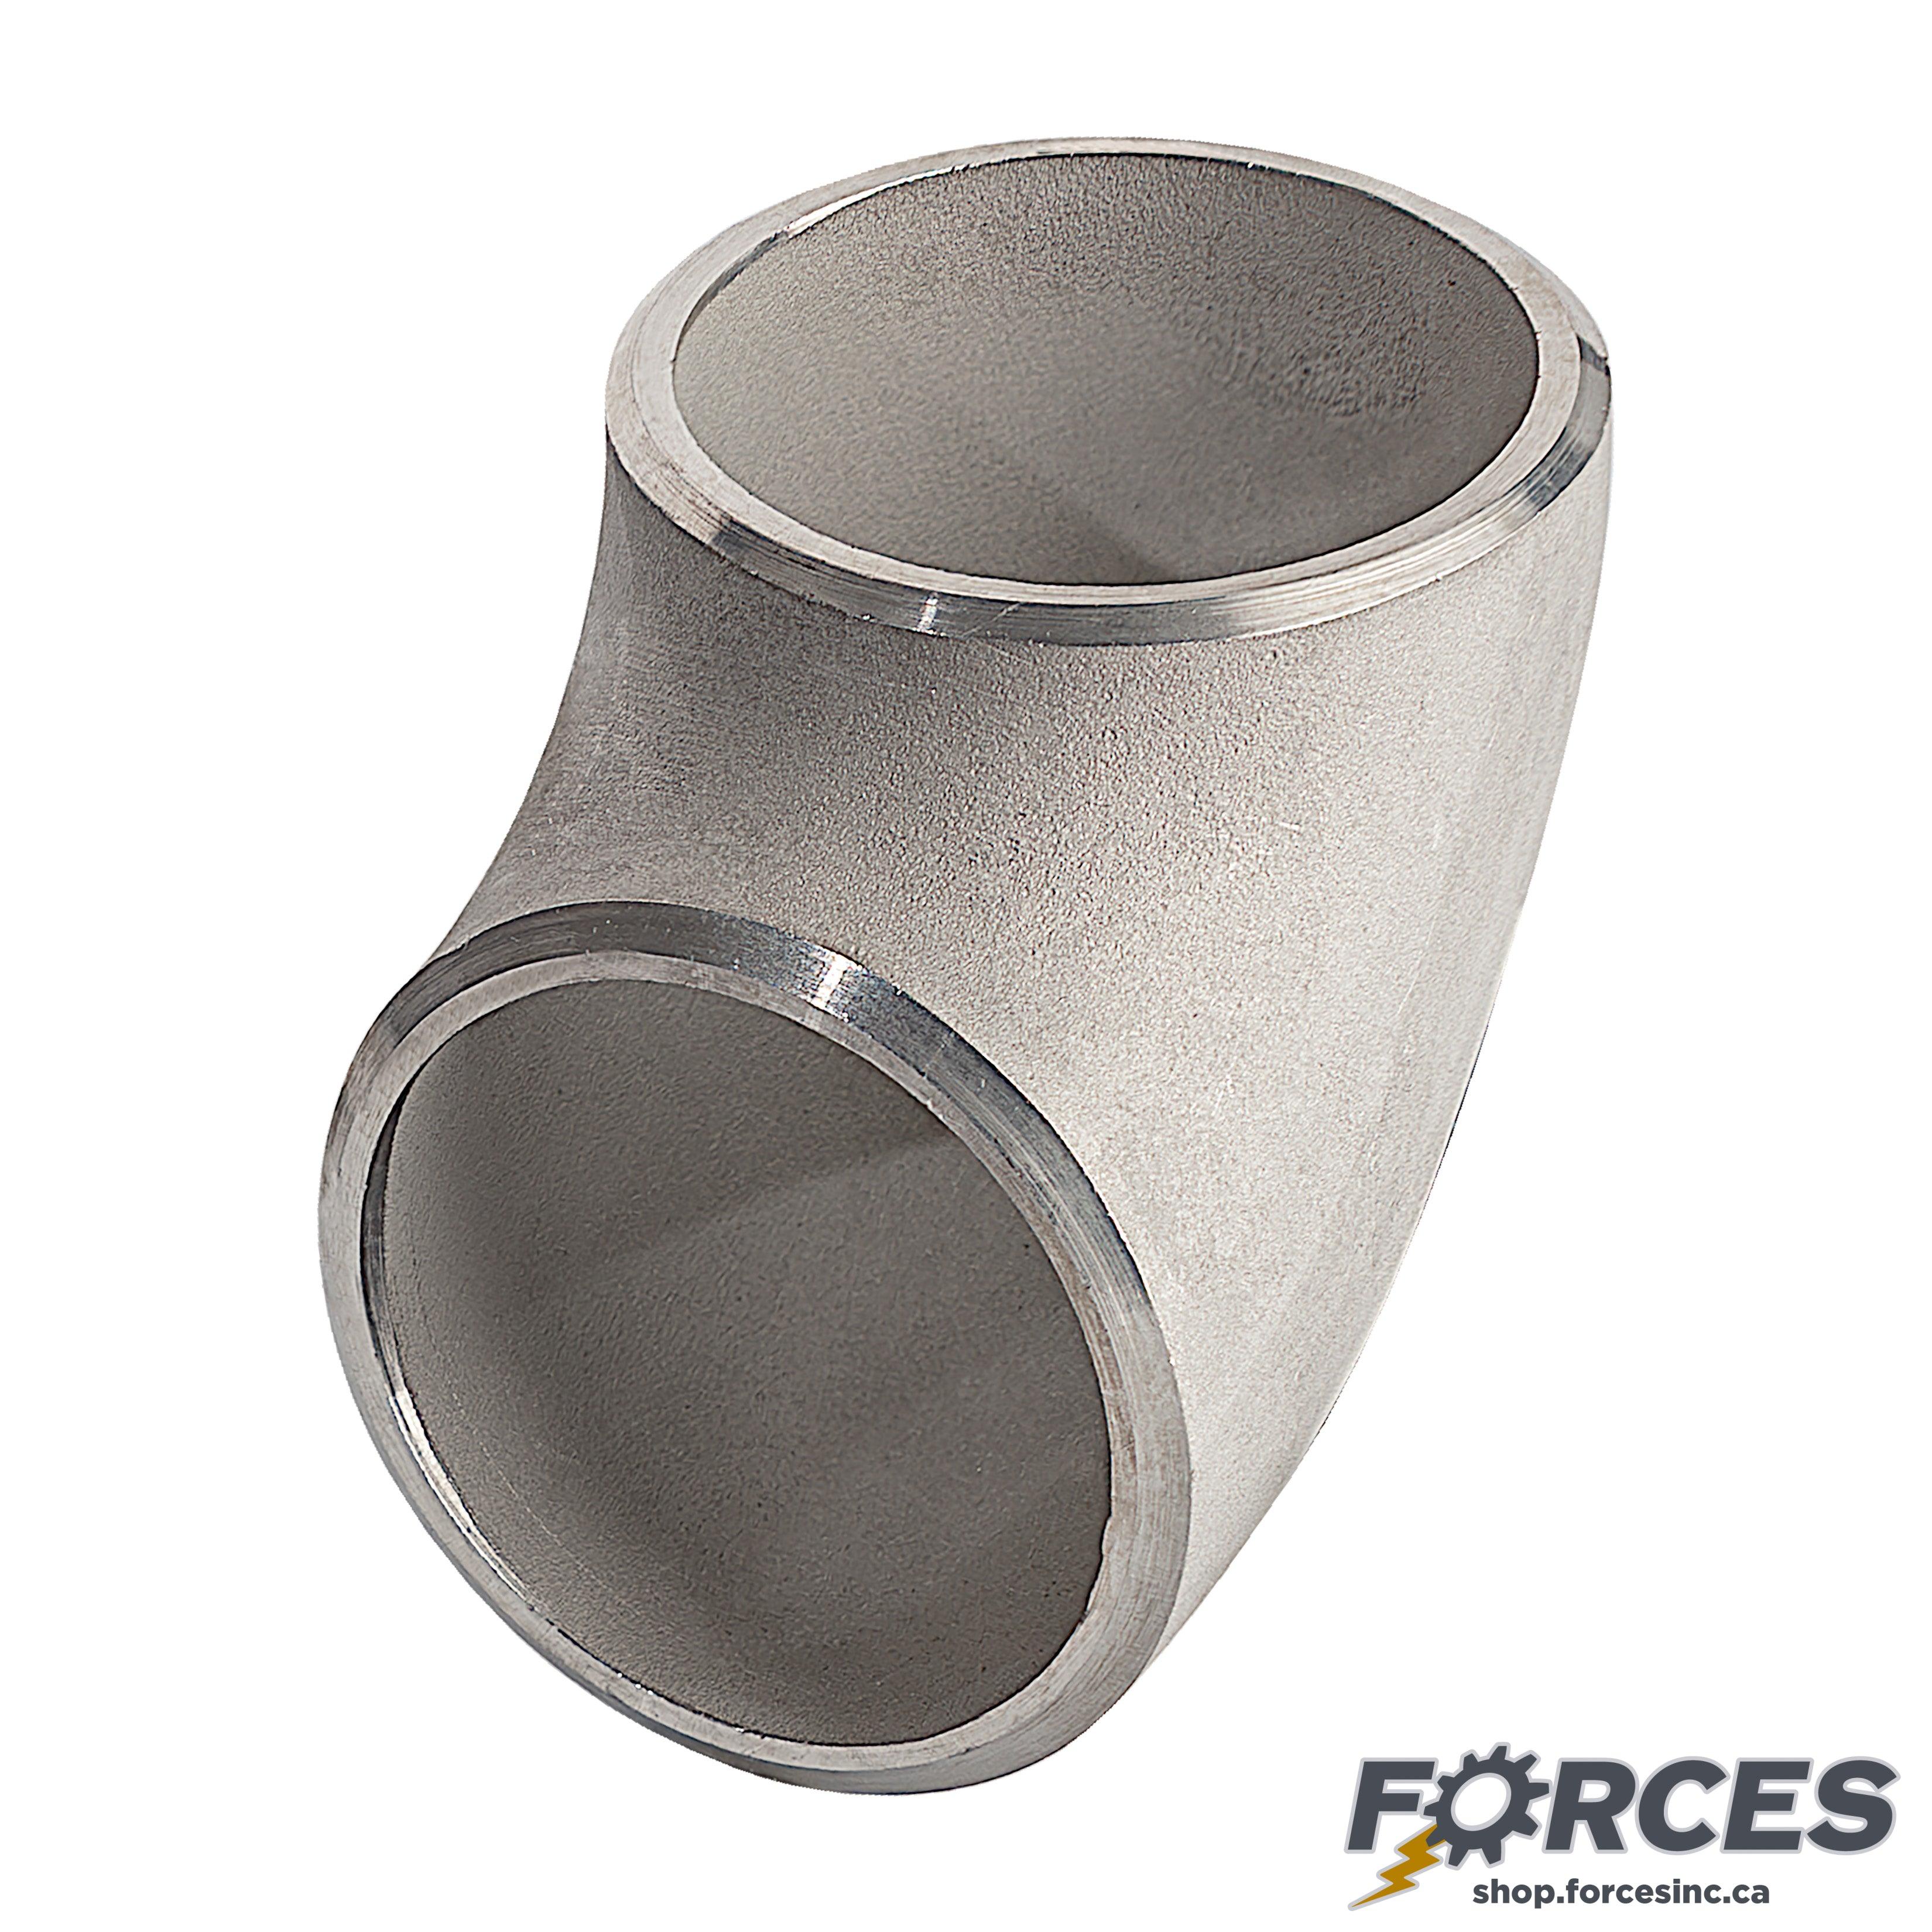 1-1/4" Elbow 45° SCH 40 Butt Weld - Stainless Steel 304 - Forces Inc